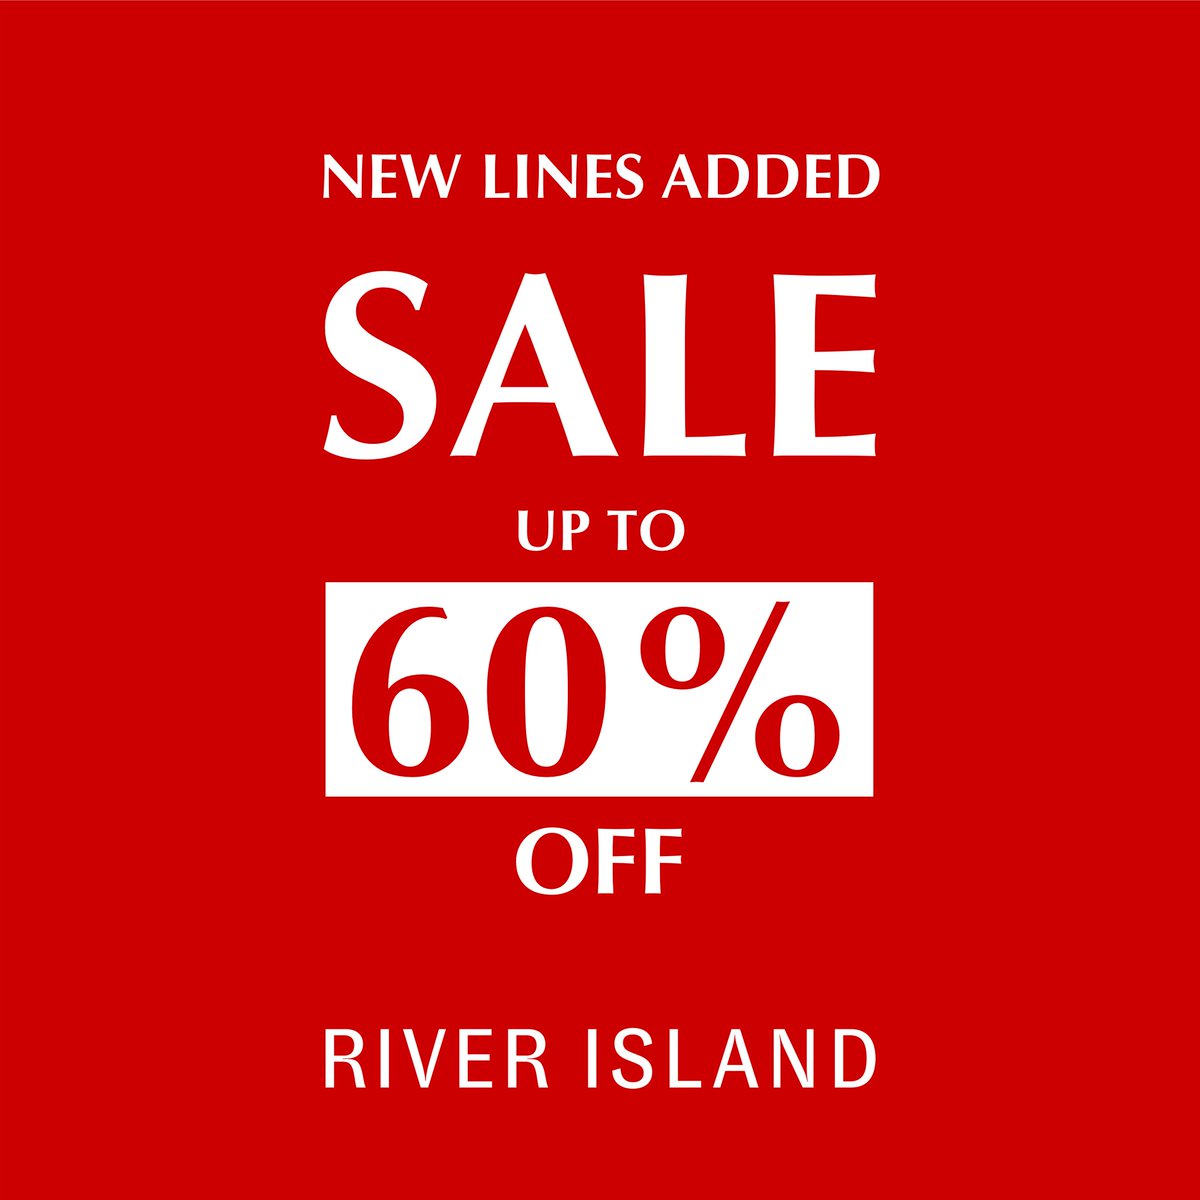 Loads of new lines added to the fantastic River Sale from today!  Get up to 60% off your favourite items.  Pop in today! 

#riverislandsale #riverisland #dublintown #yourcityyourilac